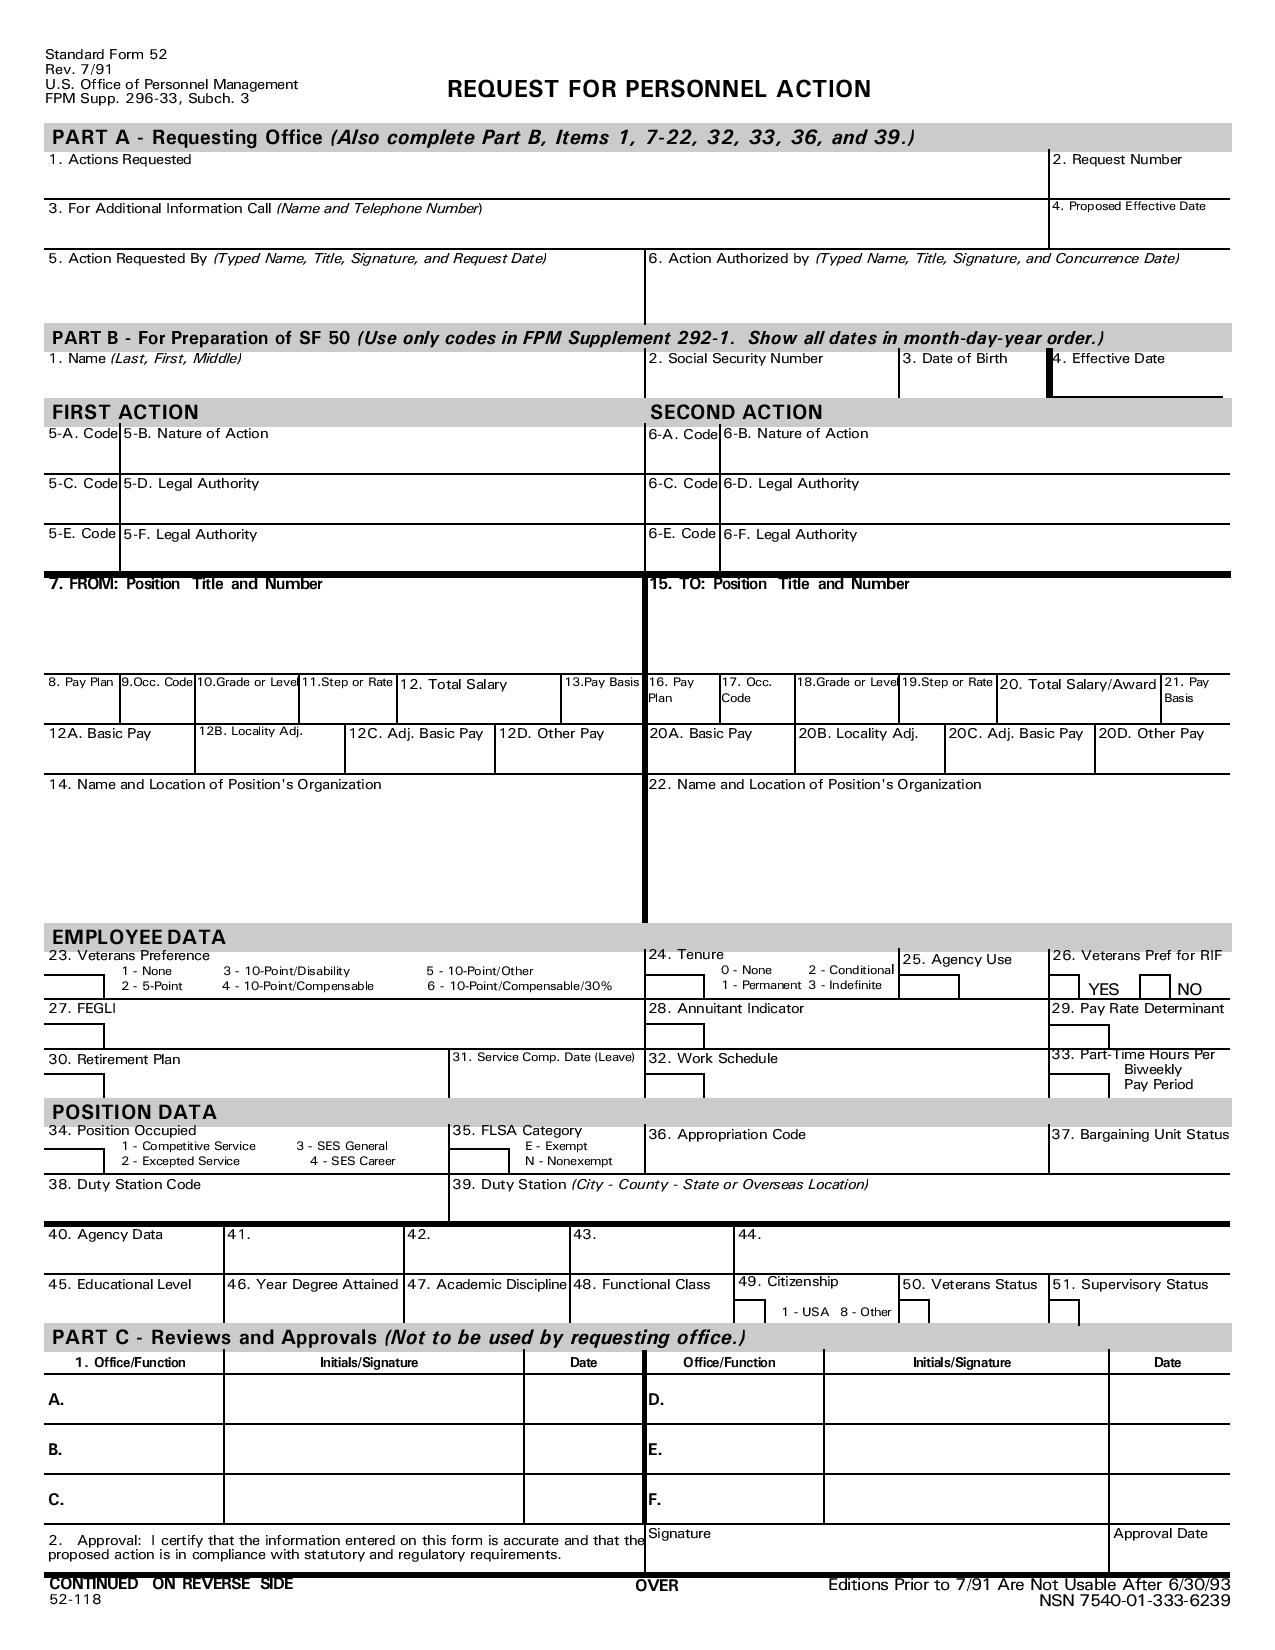 request for personnel action form page 0011